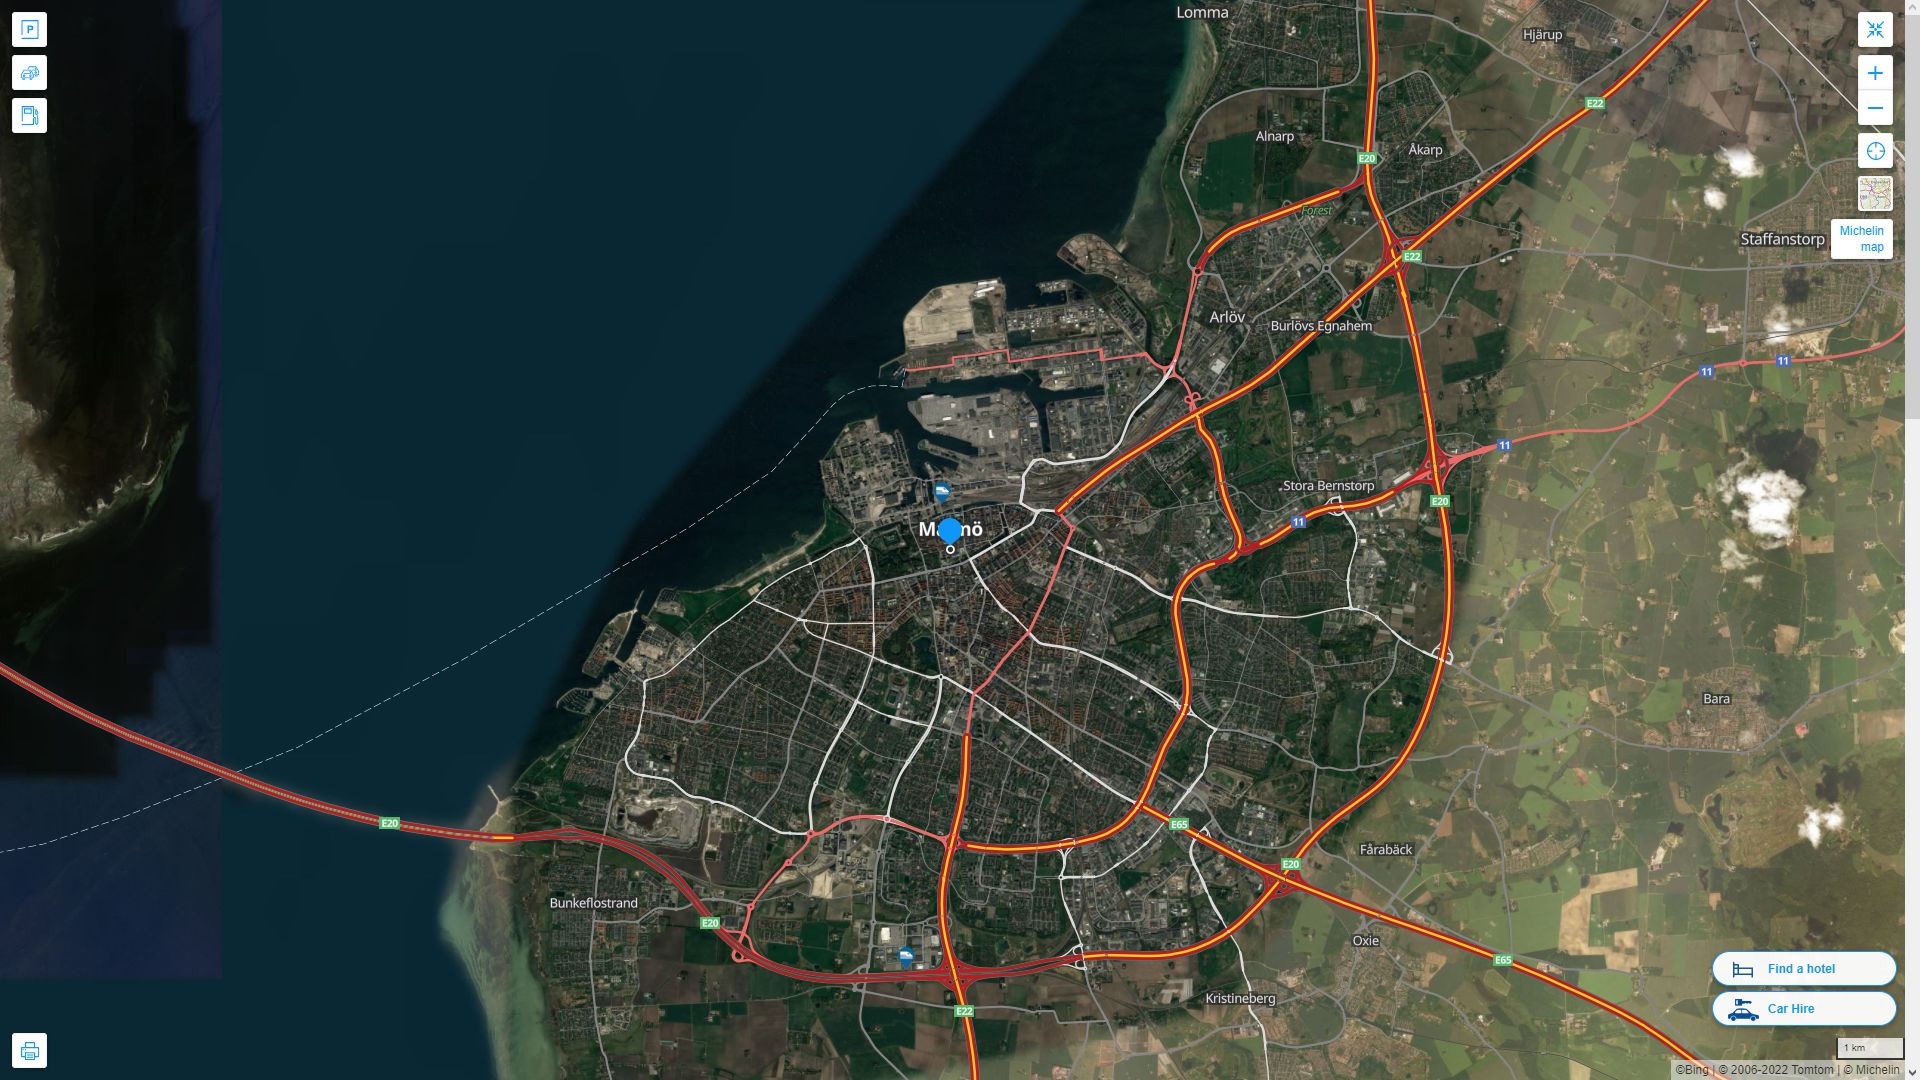 Malmo Highway and Road Map with Satellite View